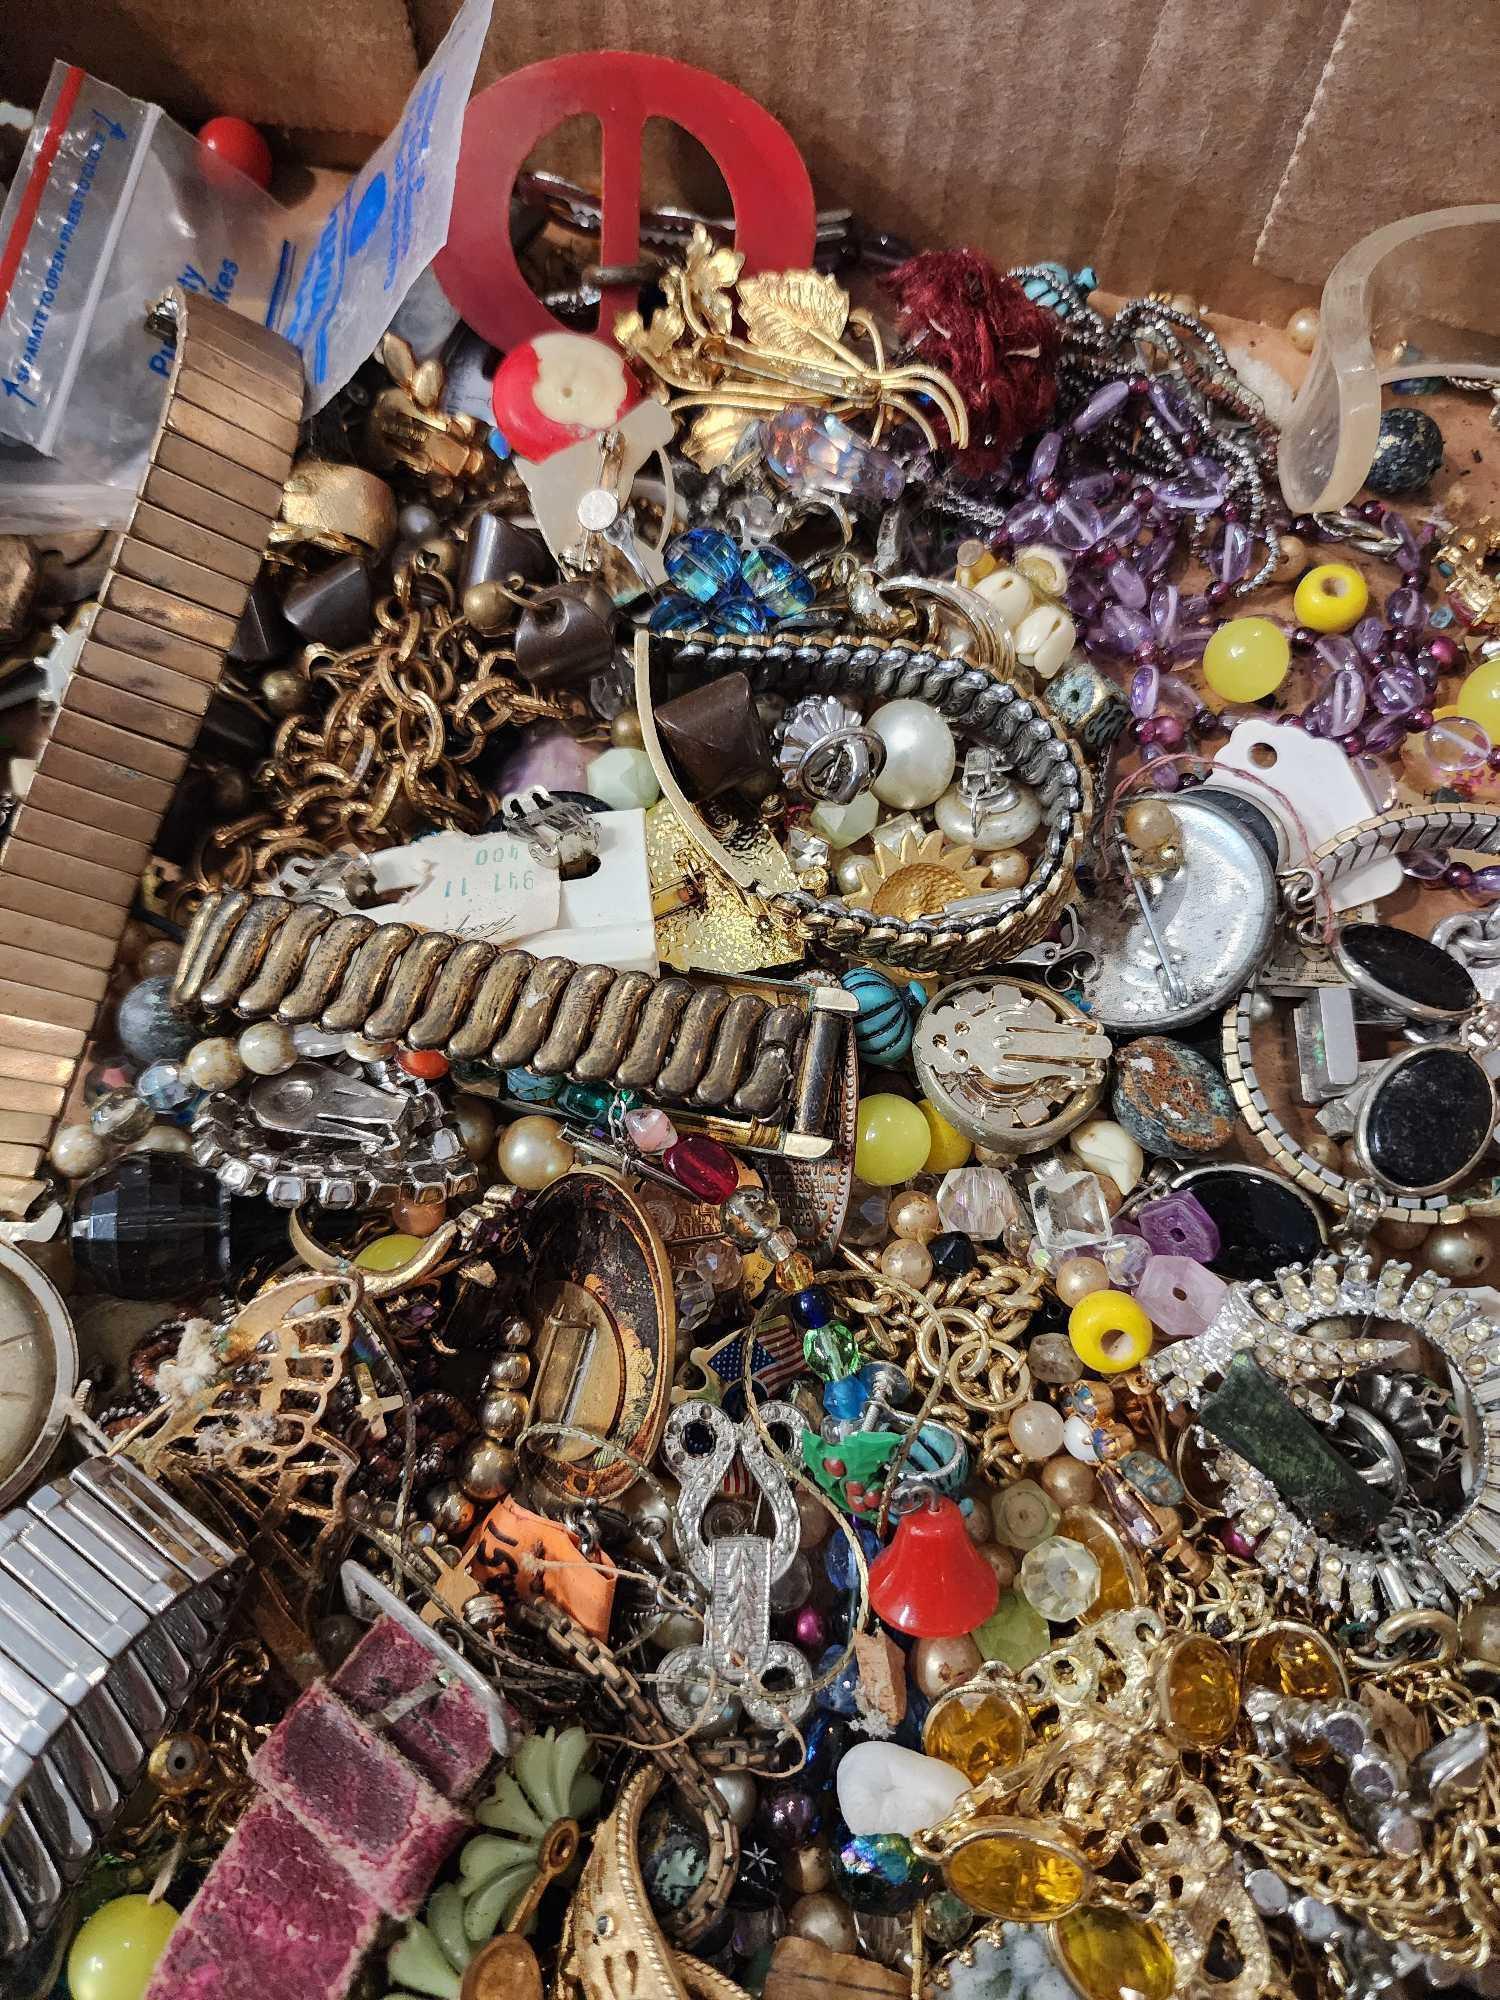 Box lot of vintage jewelry: watches, parts, loose pieces